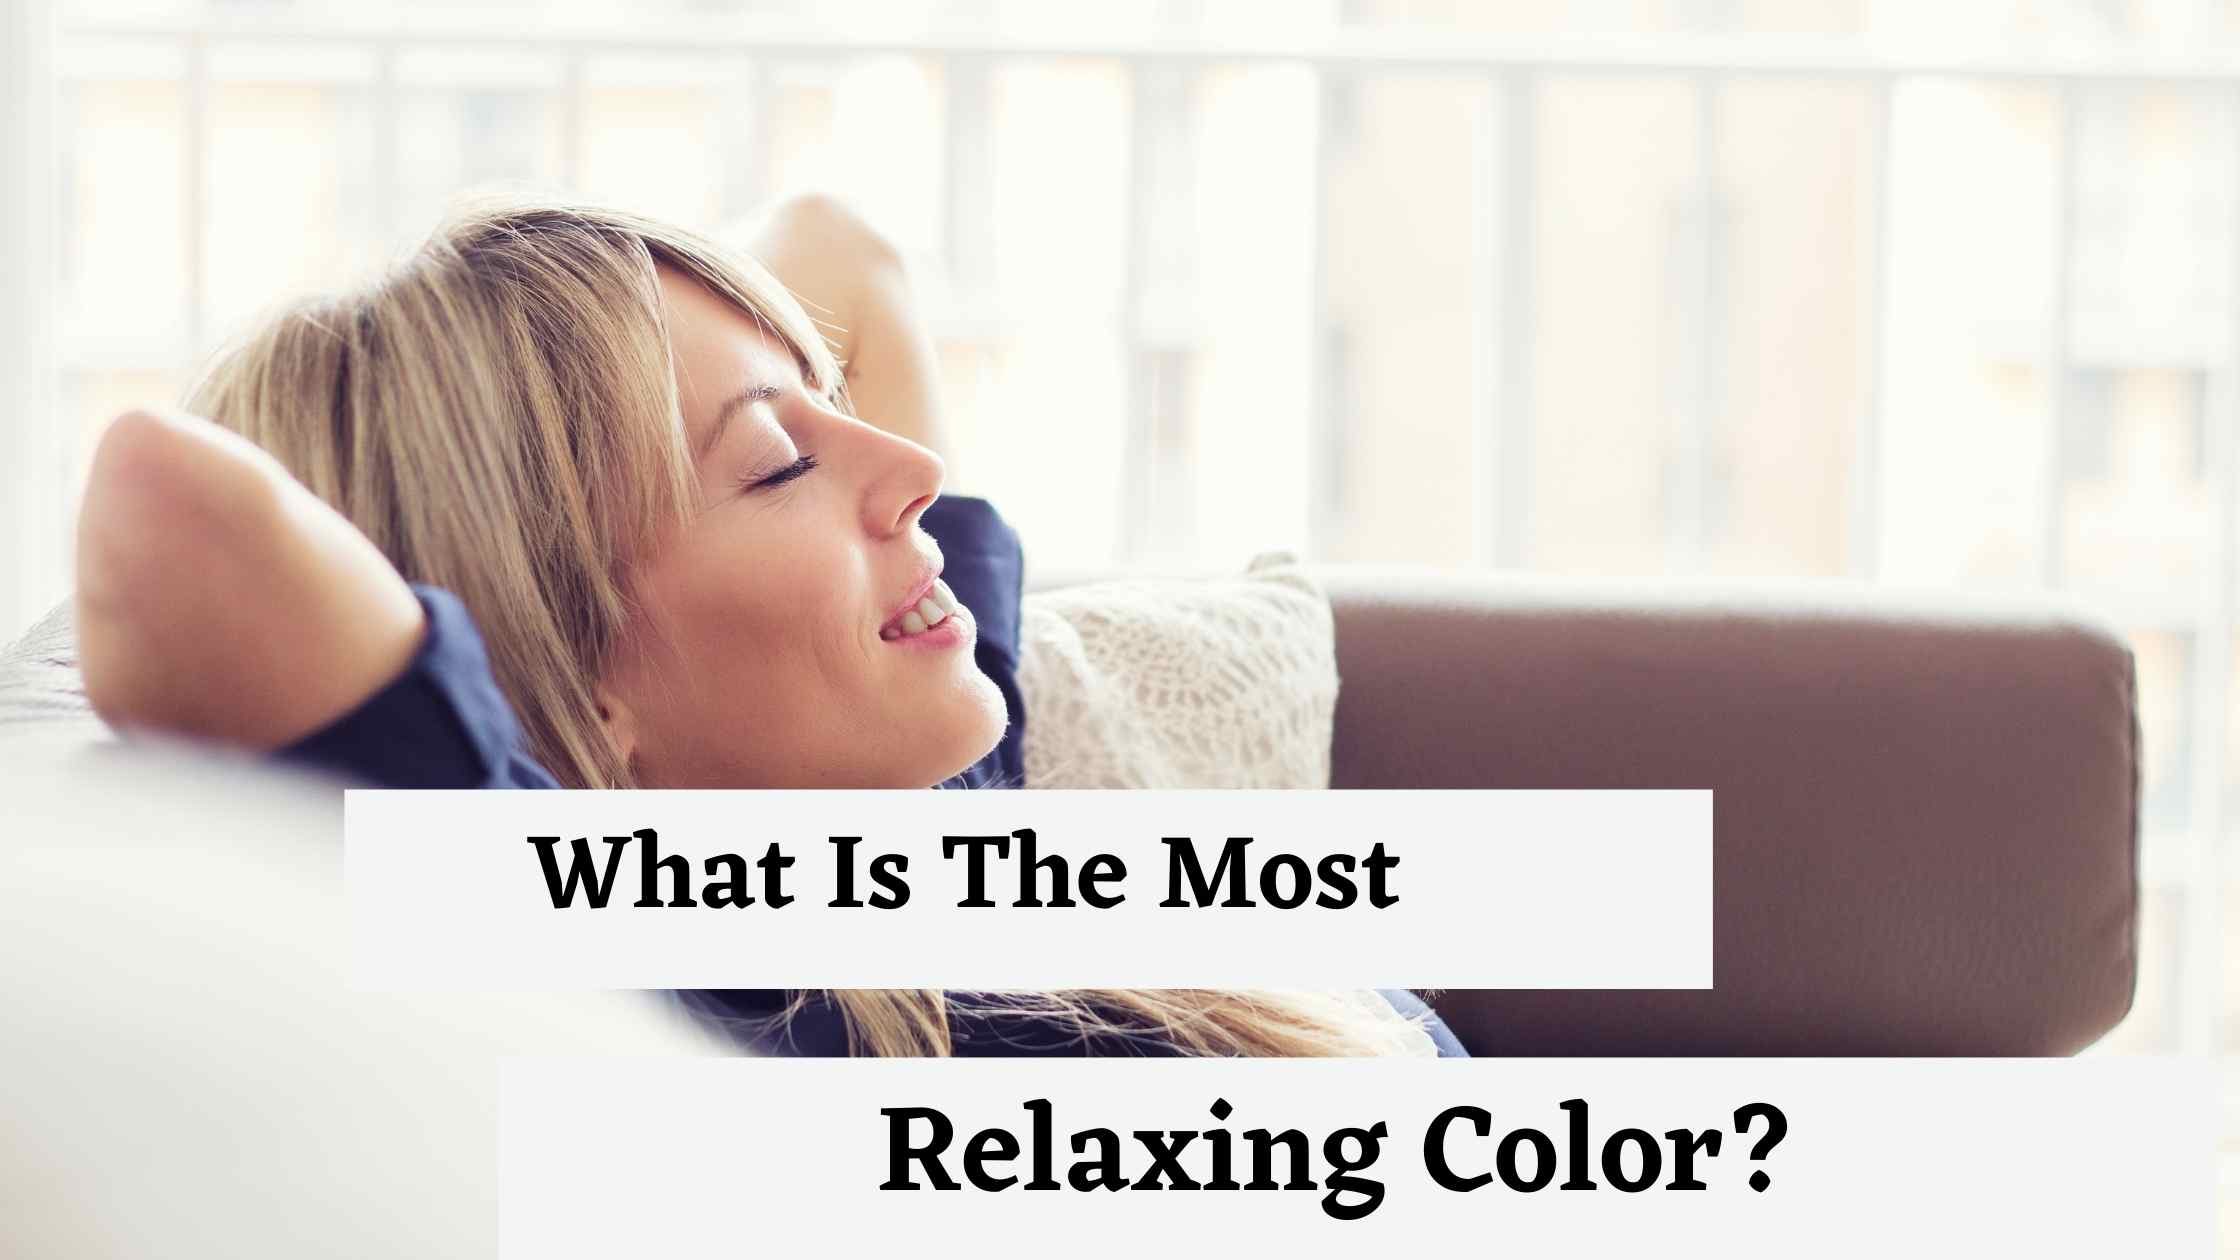 What Is The Most Relaxing Color?